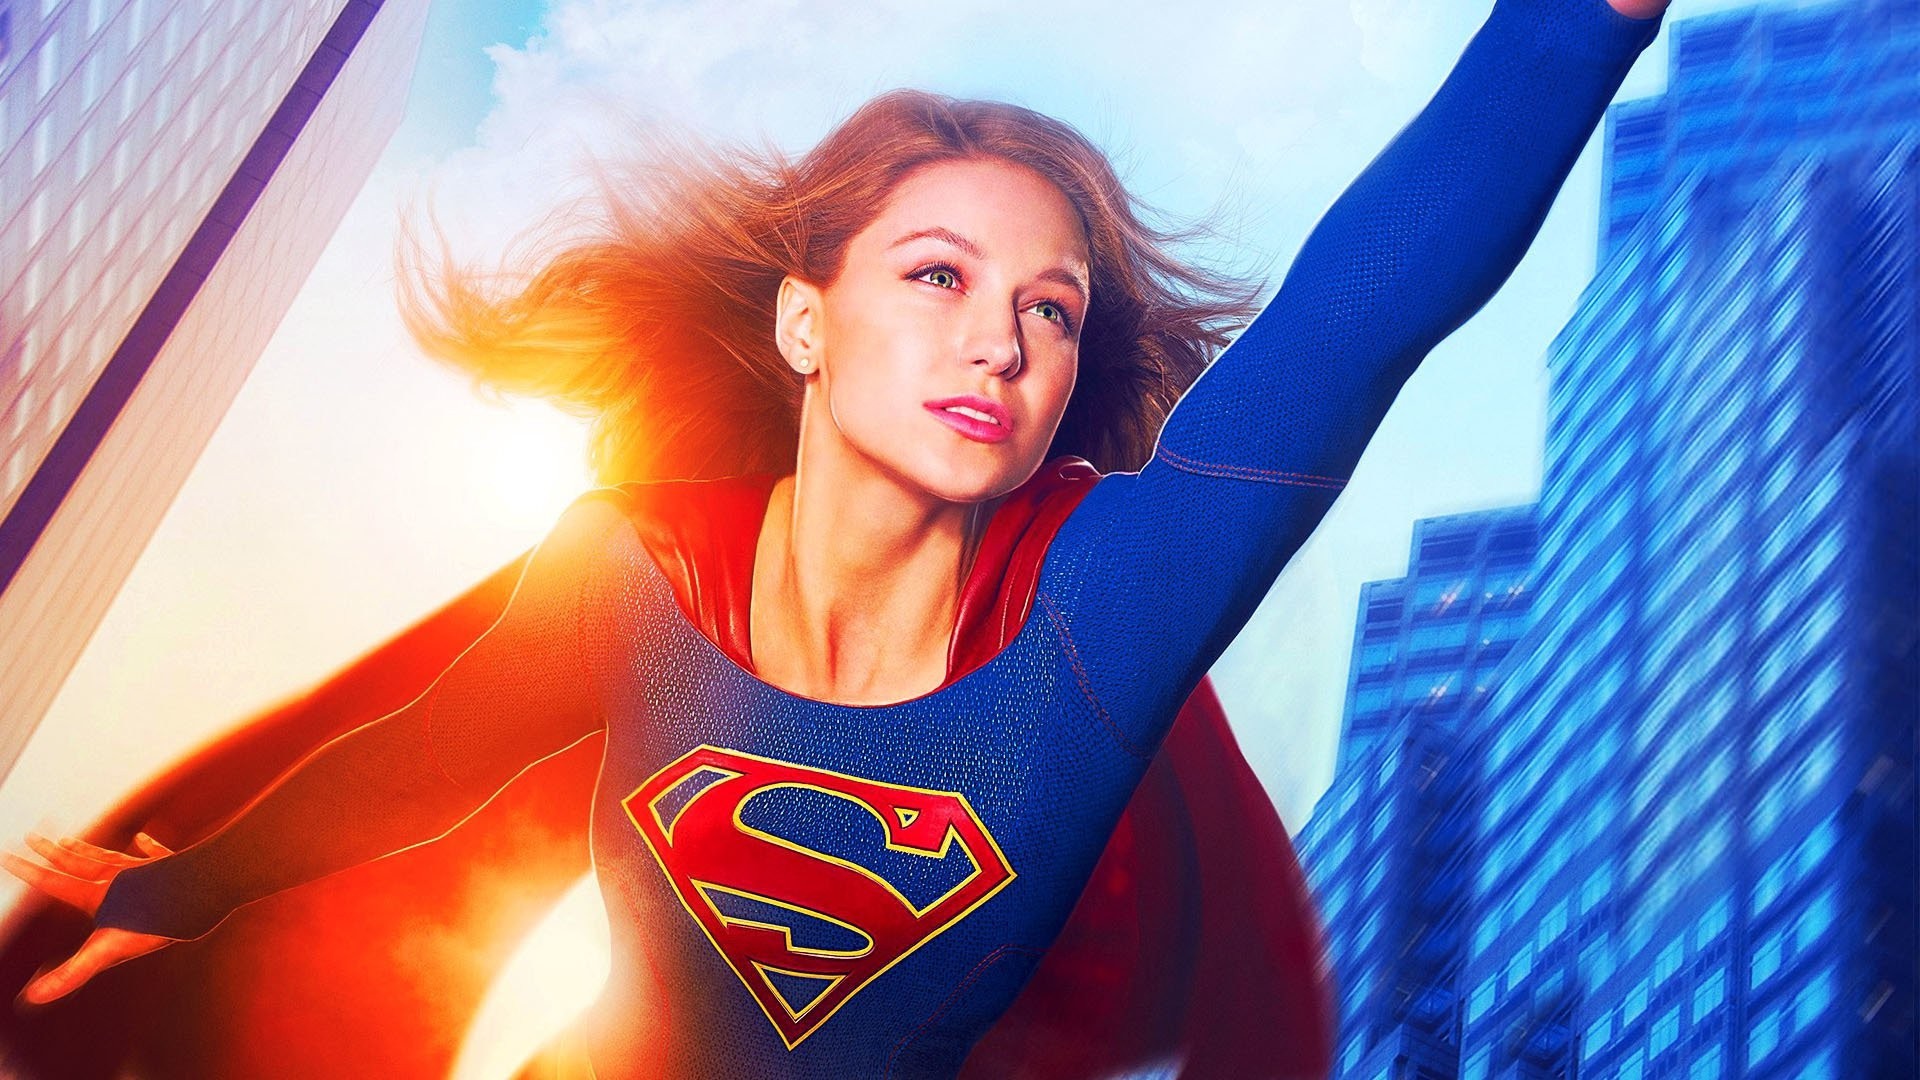 Wallpaper Supergirl with high-resolution 1920x1080 pixel. You can use this wallpaper for your Windows and Mac OS computers as well as your Android and iPhone smartphones